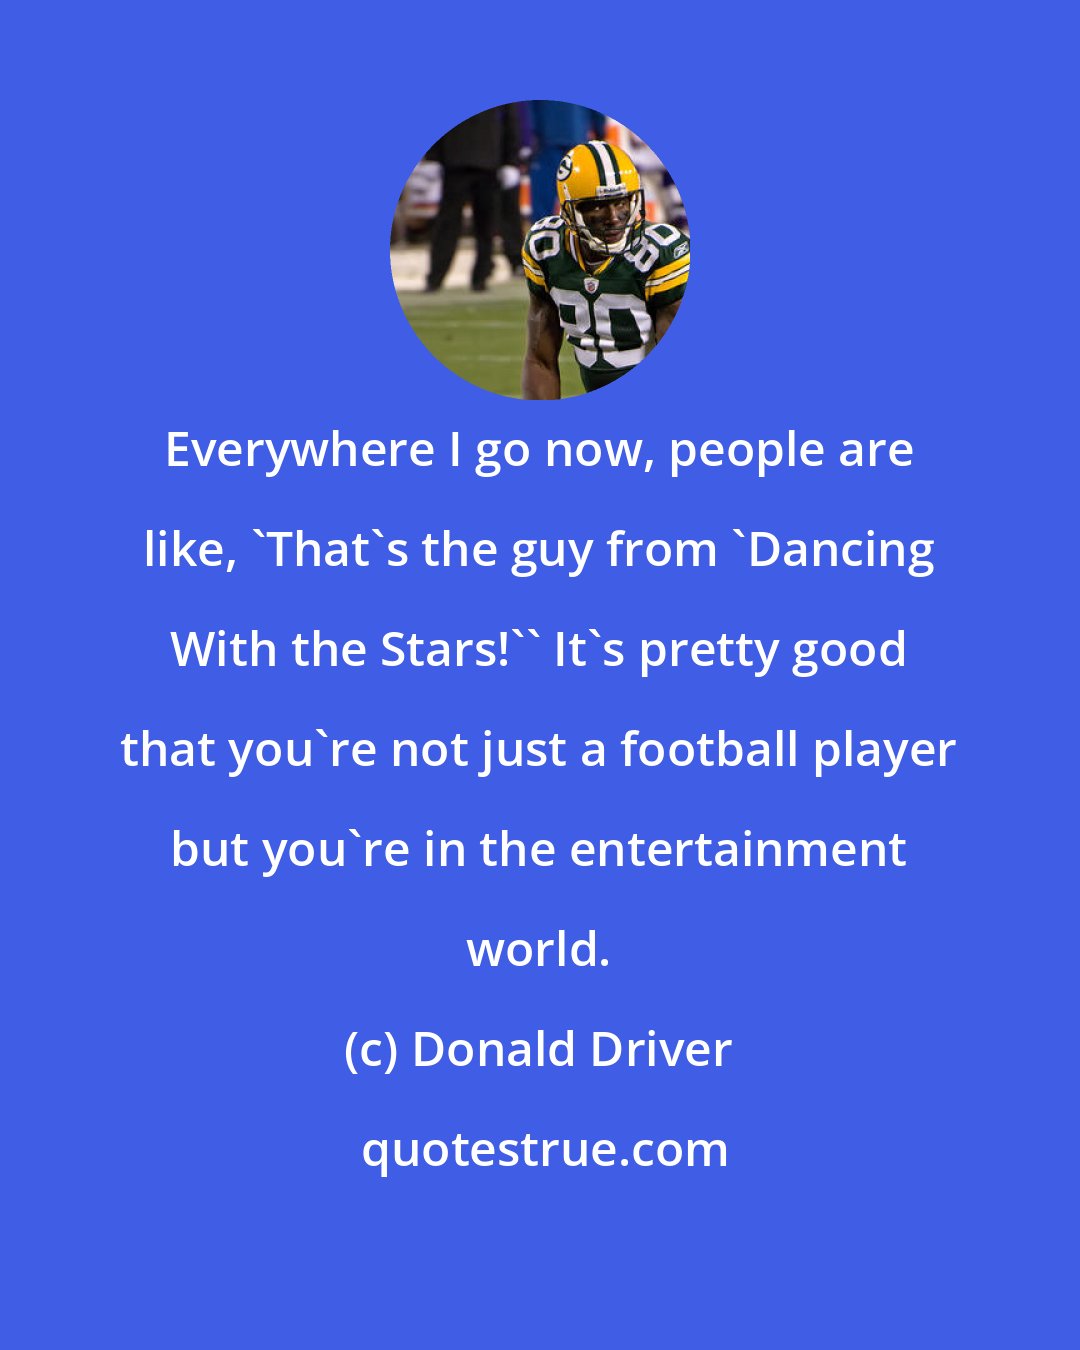 Donald Driver: Everywhere I go now, people are like, 'That's the guy from 'Dancing With the Stars!'' It's pretty good that you're not just a football player but you're in the entertainment world.